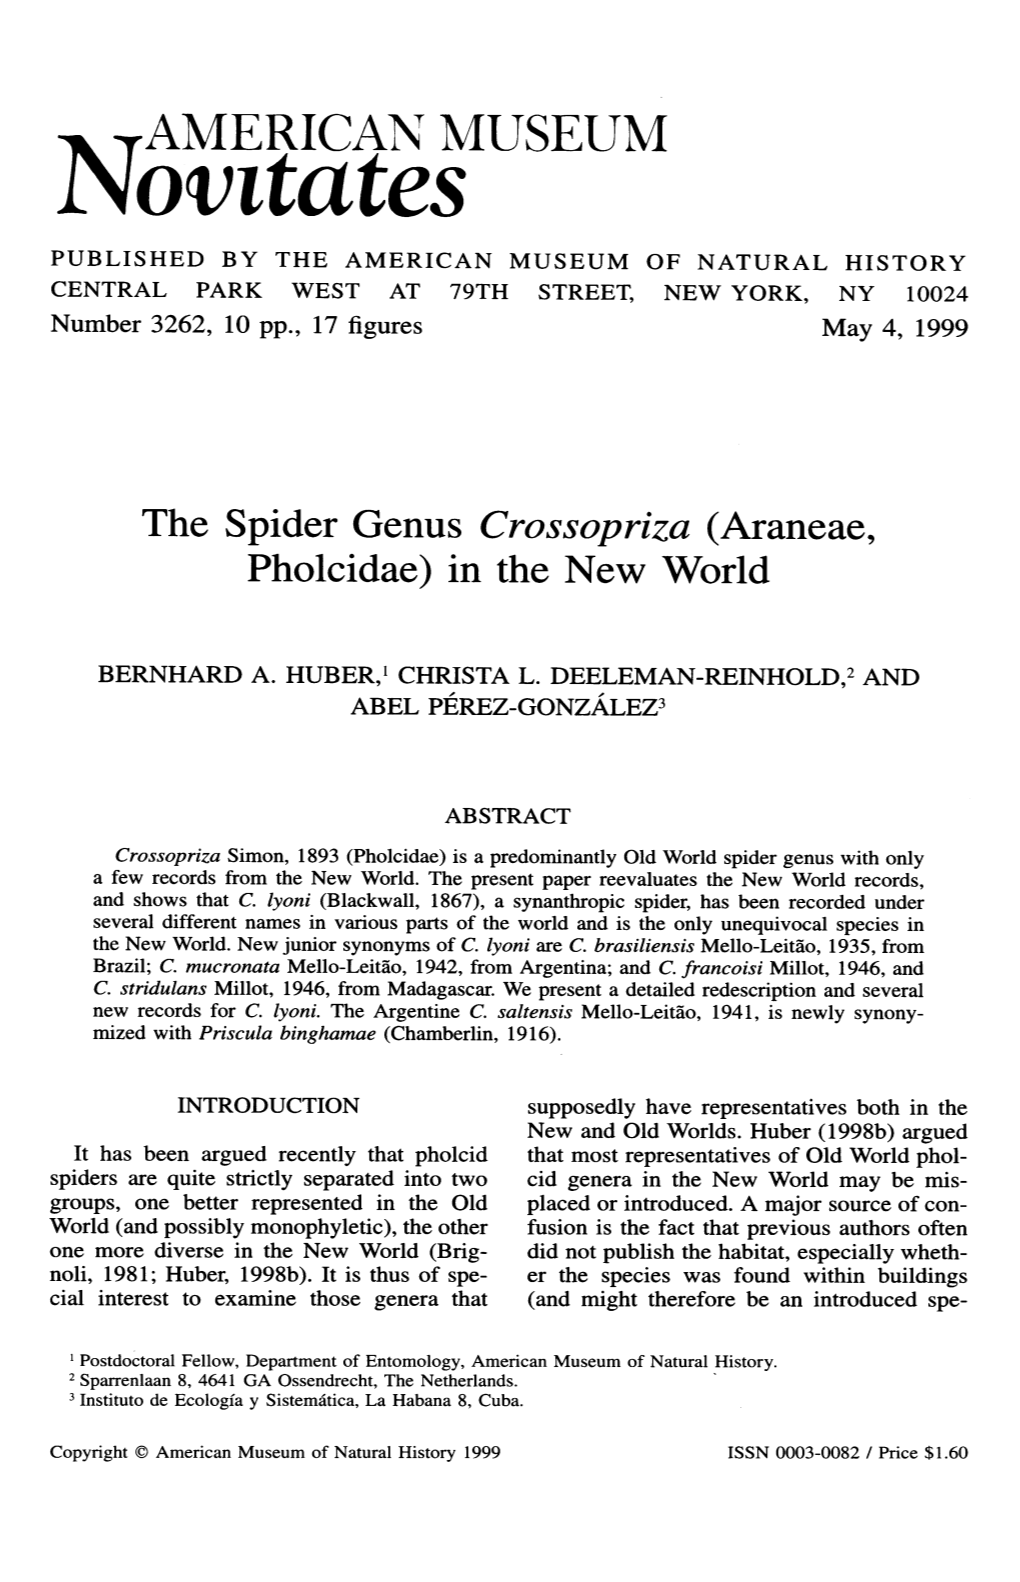 Norntates PUBLISHED by the AMERICAN MUSEUM of NATURAL HISTORY CENTRAL PARK WEST at 79TH STREET, NEW YORK, NY 10024 Number 3262, 10 Pp., 17 Figures May 4, 1999